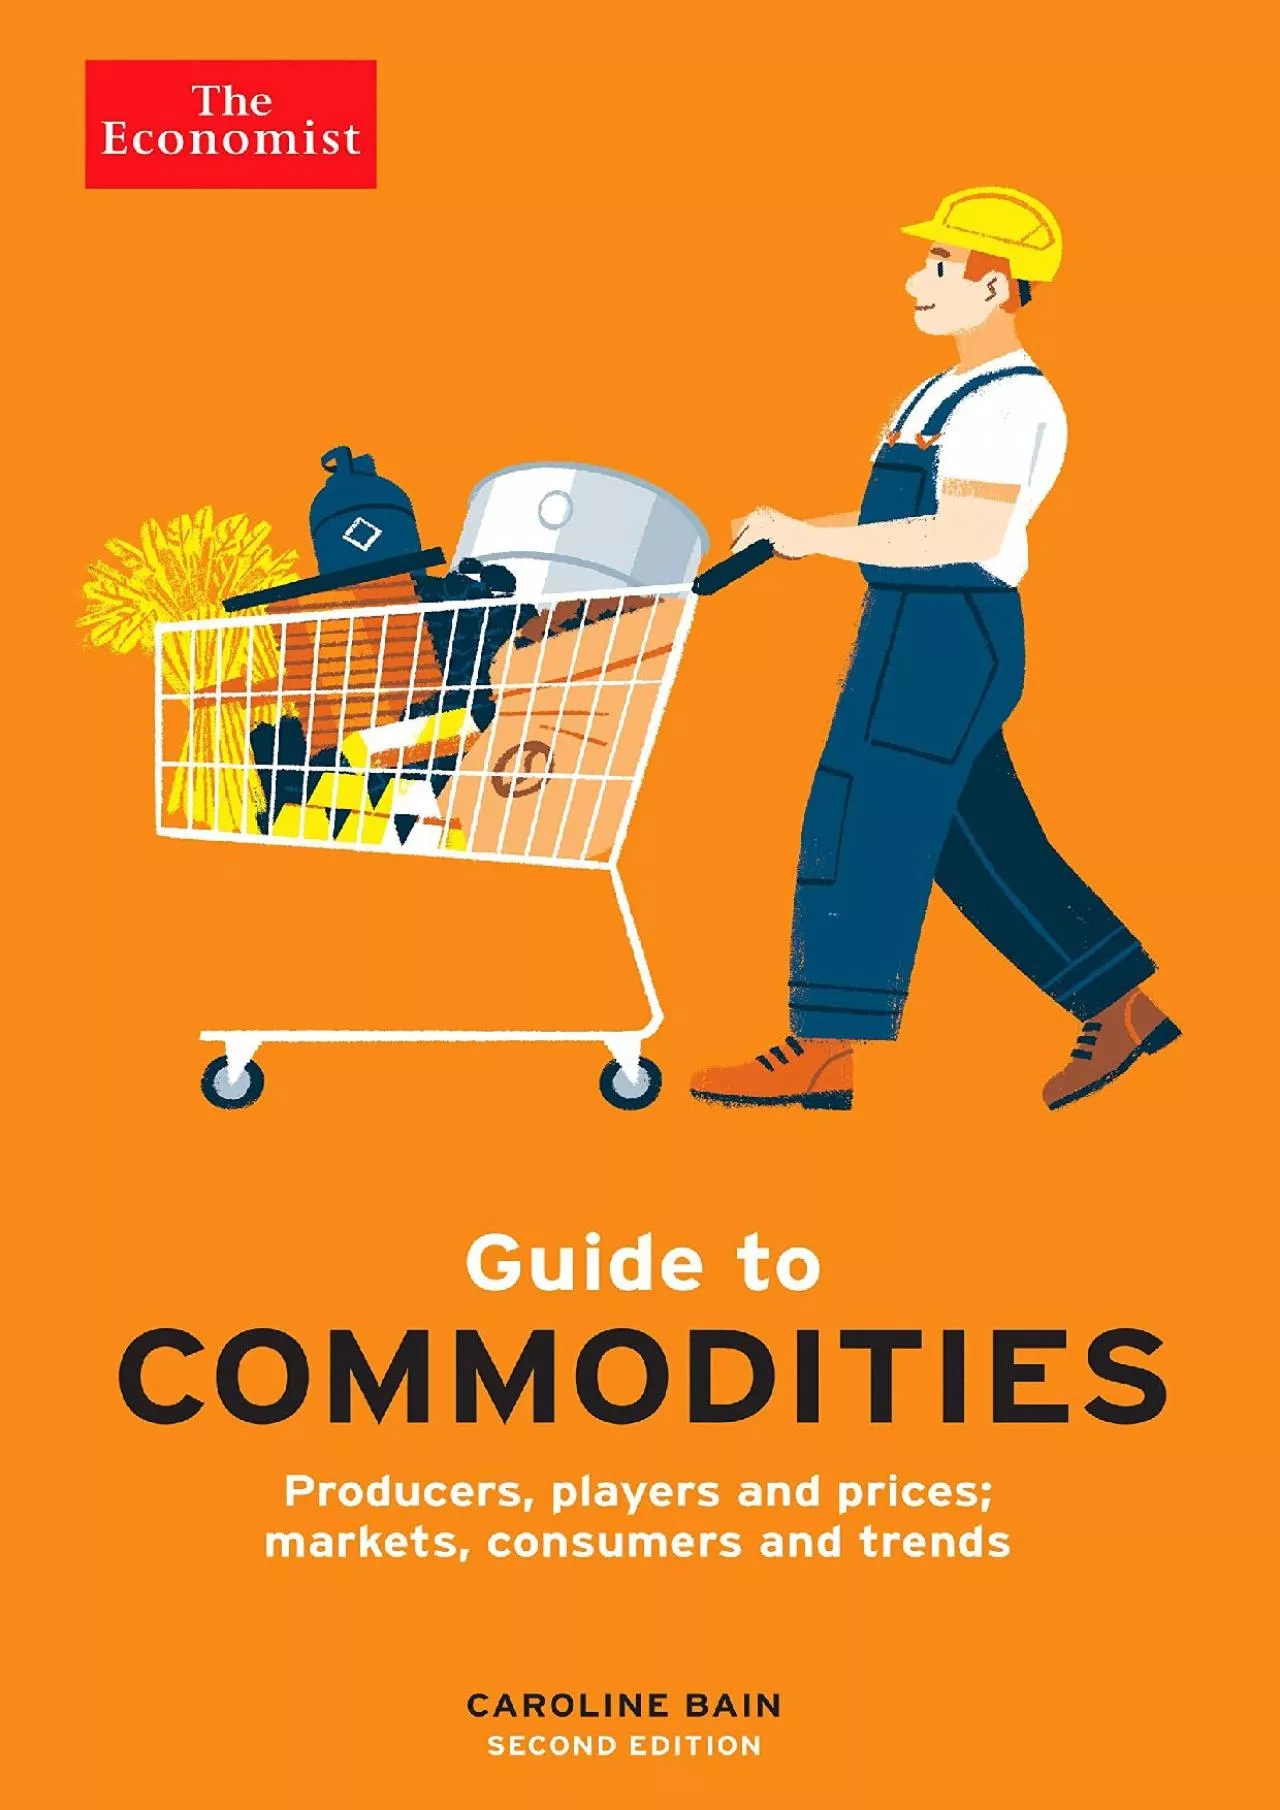 The Economist Guide to Commodities 2nd edition: Producers players and prices markets consumers